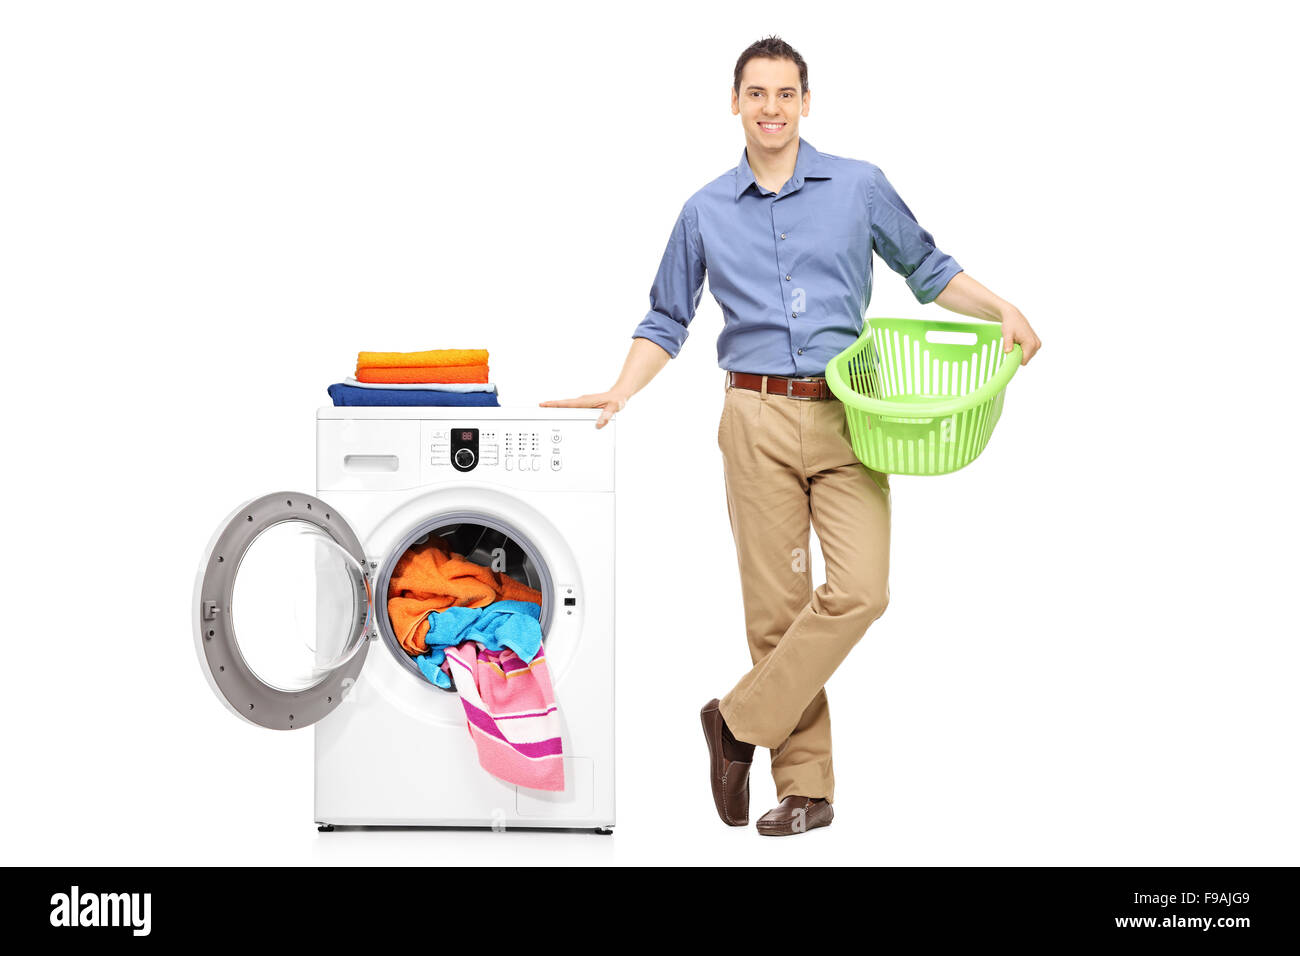 Full length portrait of a cheerful young man holding an empty laundry basket and standing next to a washing machine Stock Photo